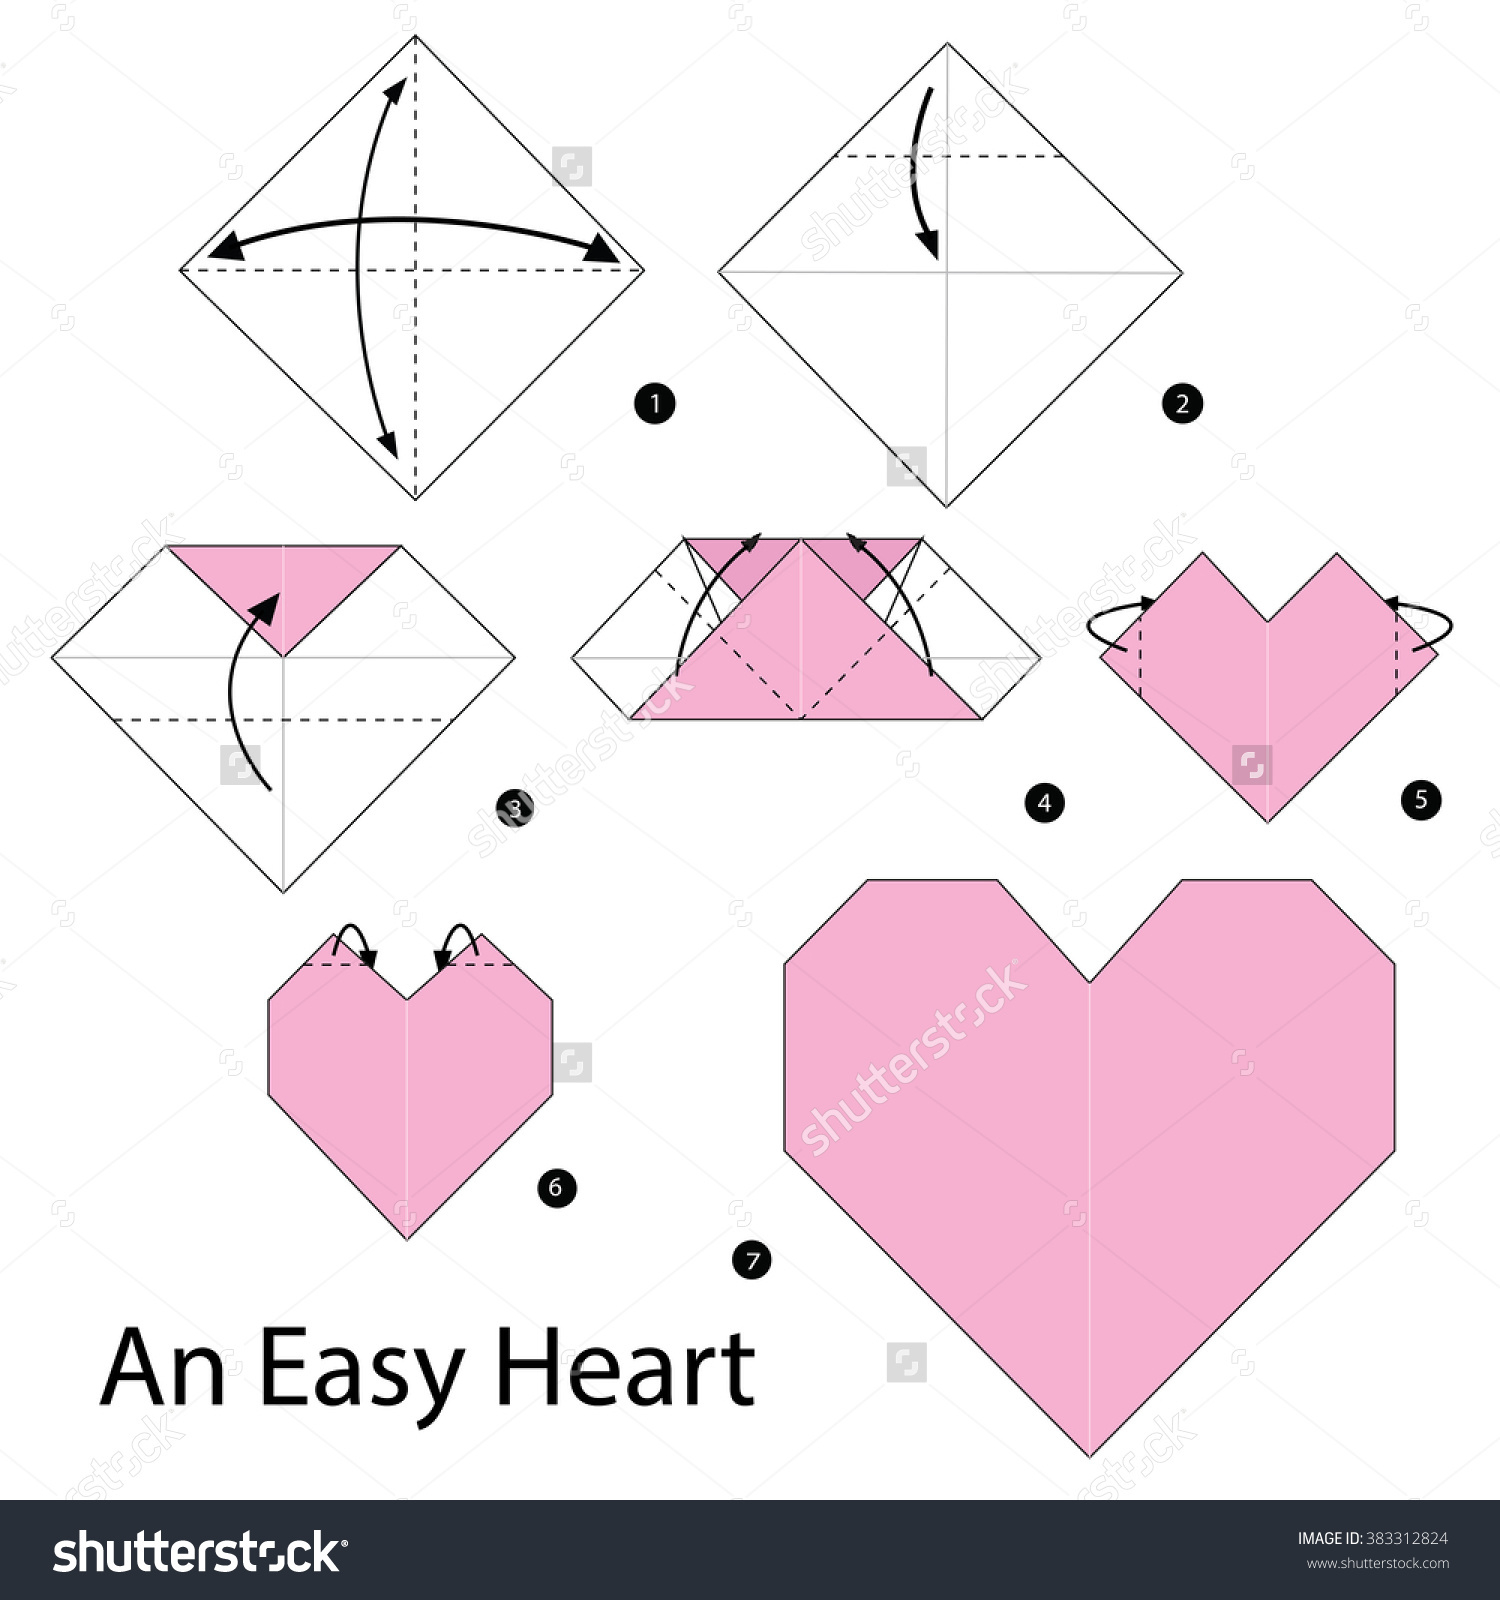 Origami For Beginners Step By Step Easy Origami Pig Face Easy Origami For Kids Kids Crafts For Easy Origami